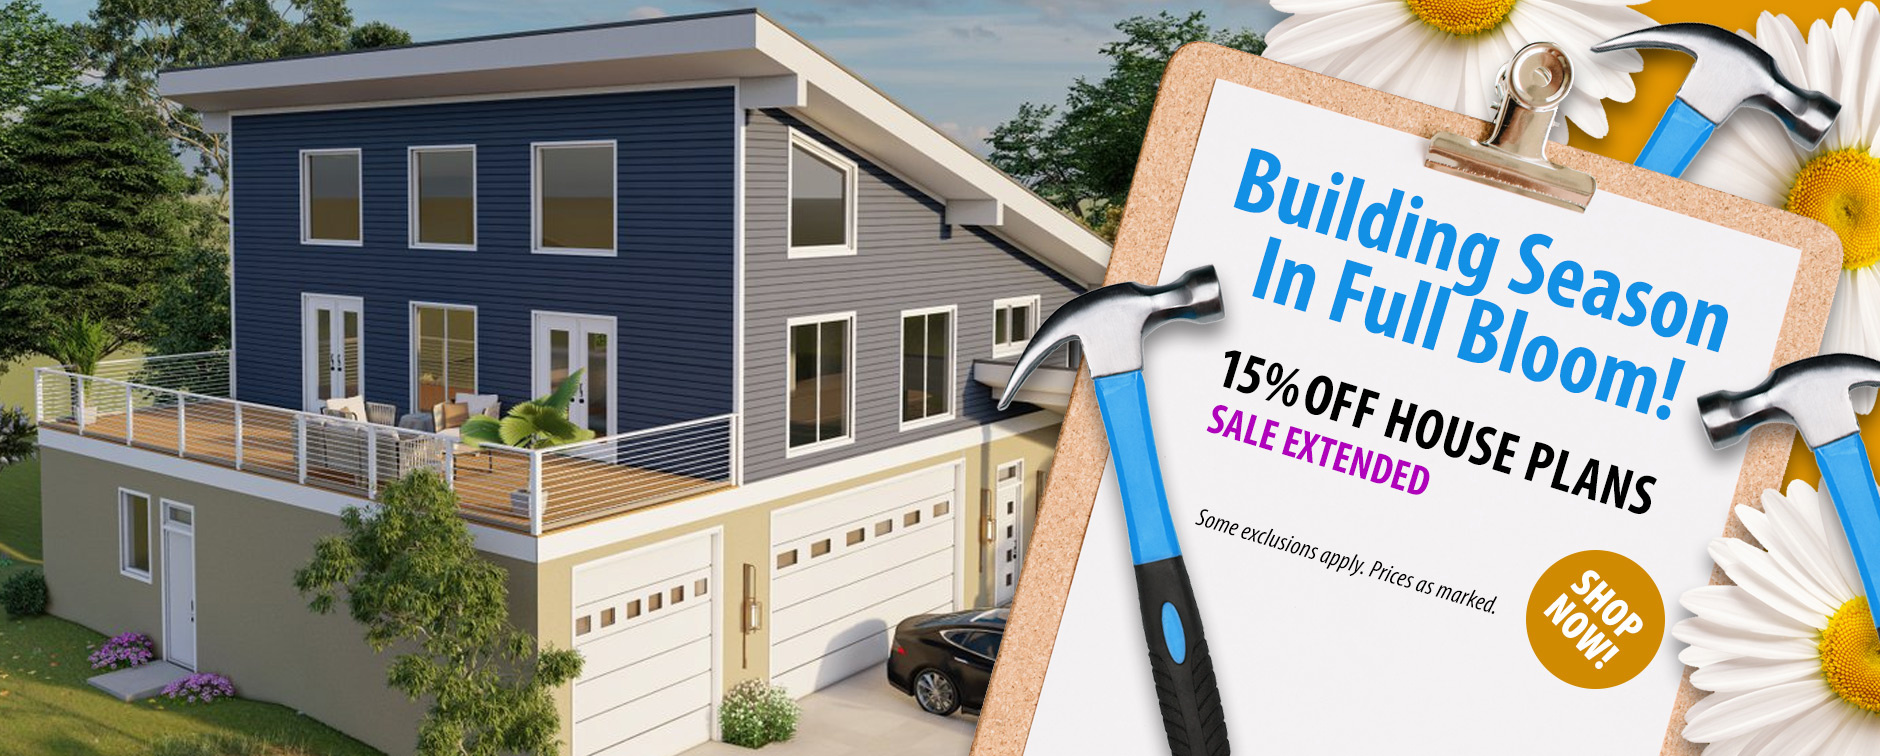 Building Season in Full Bloom: Take 15% Off House Plans - Sale Extended